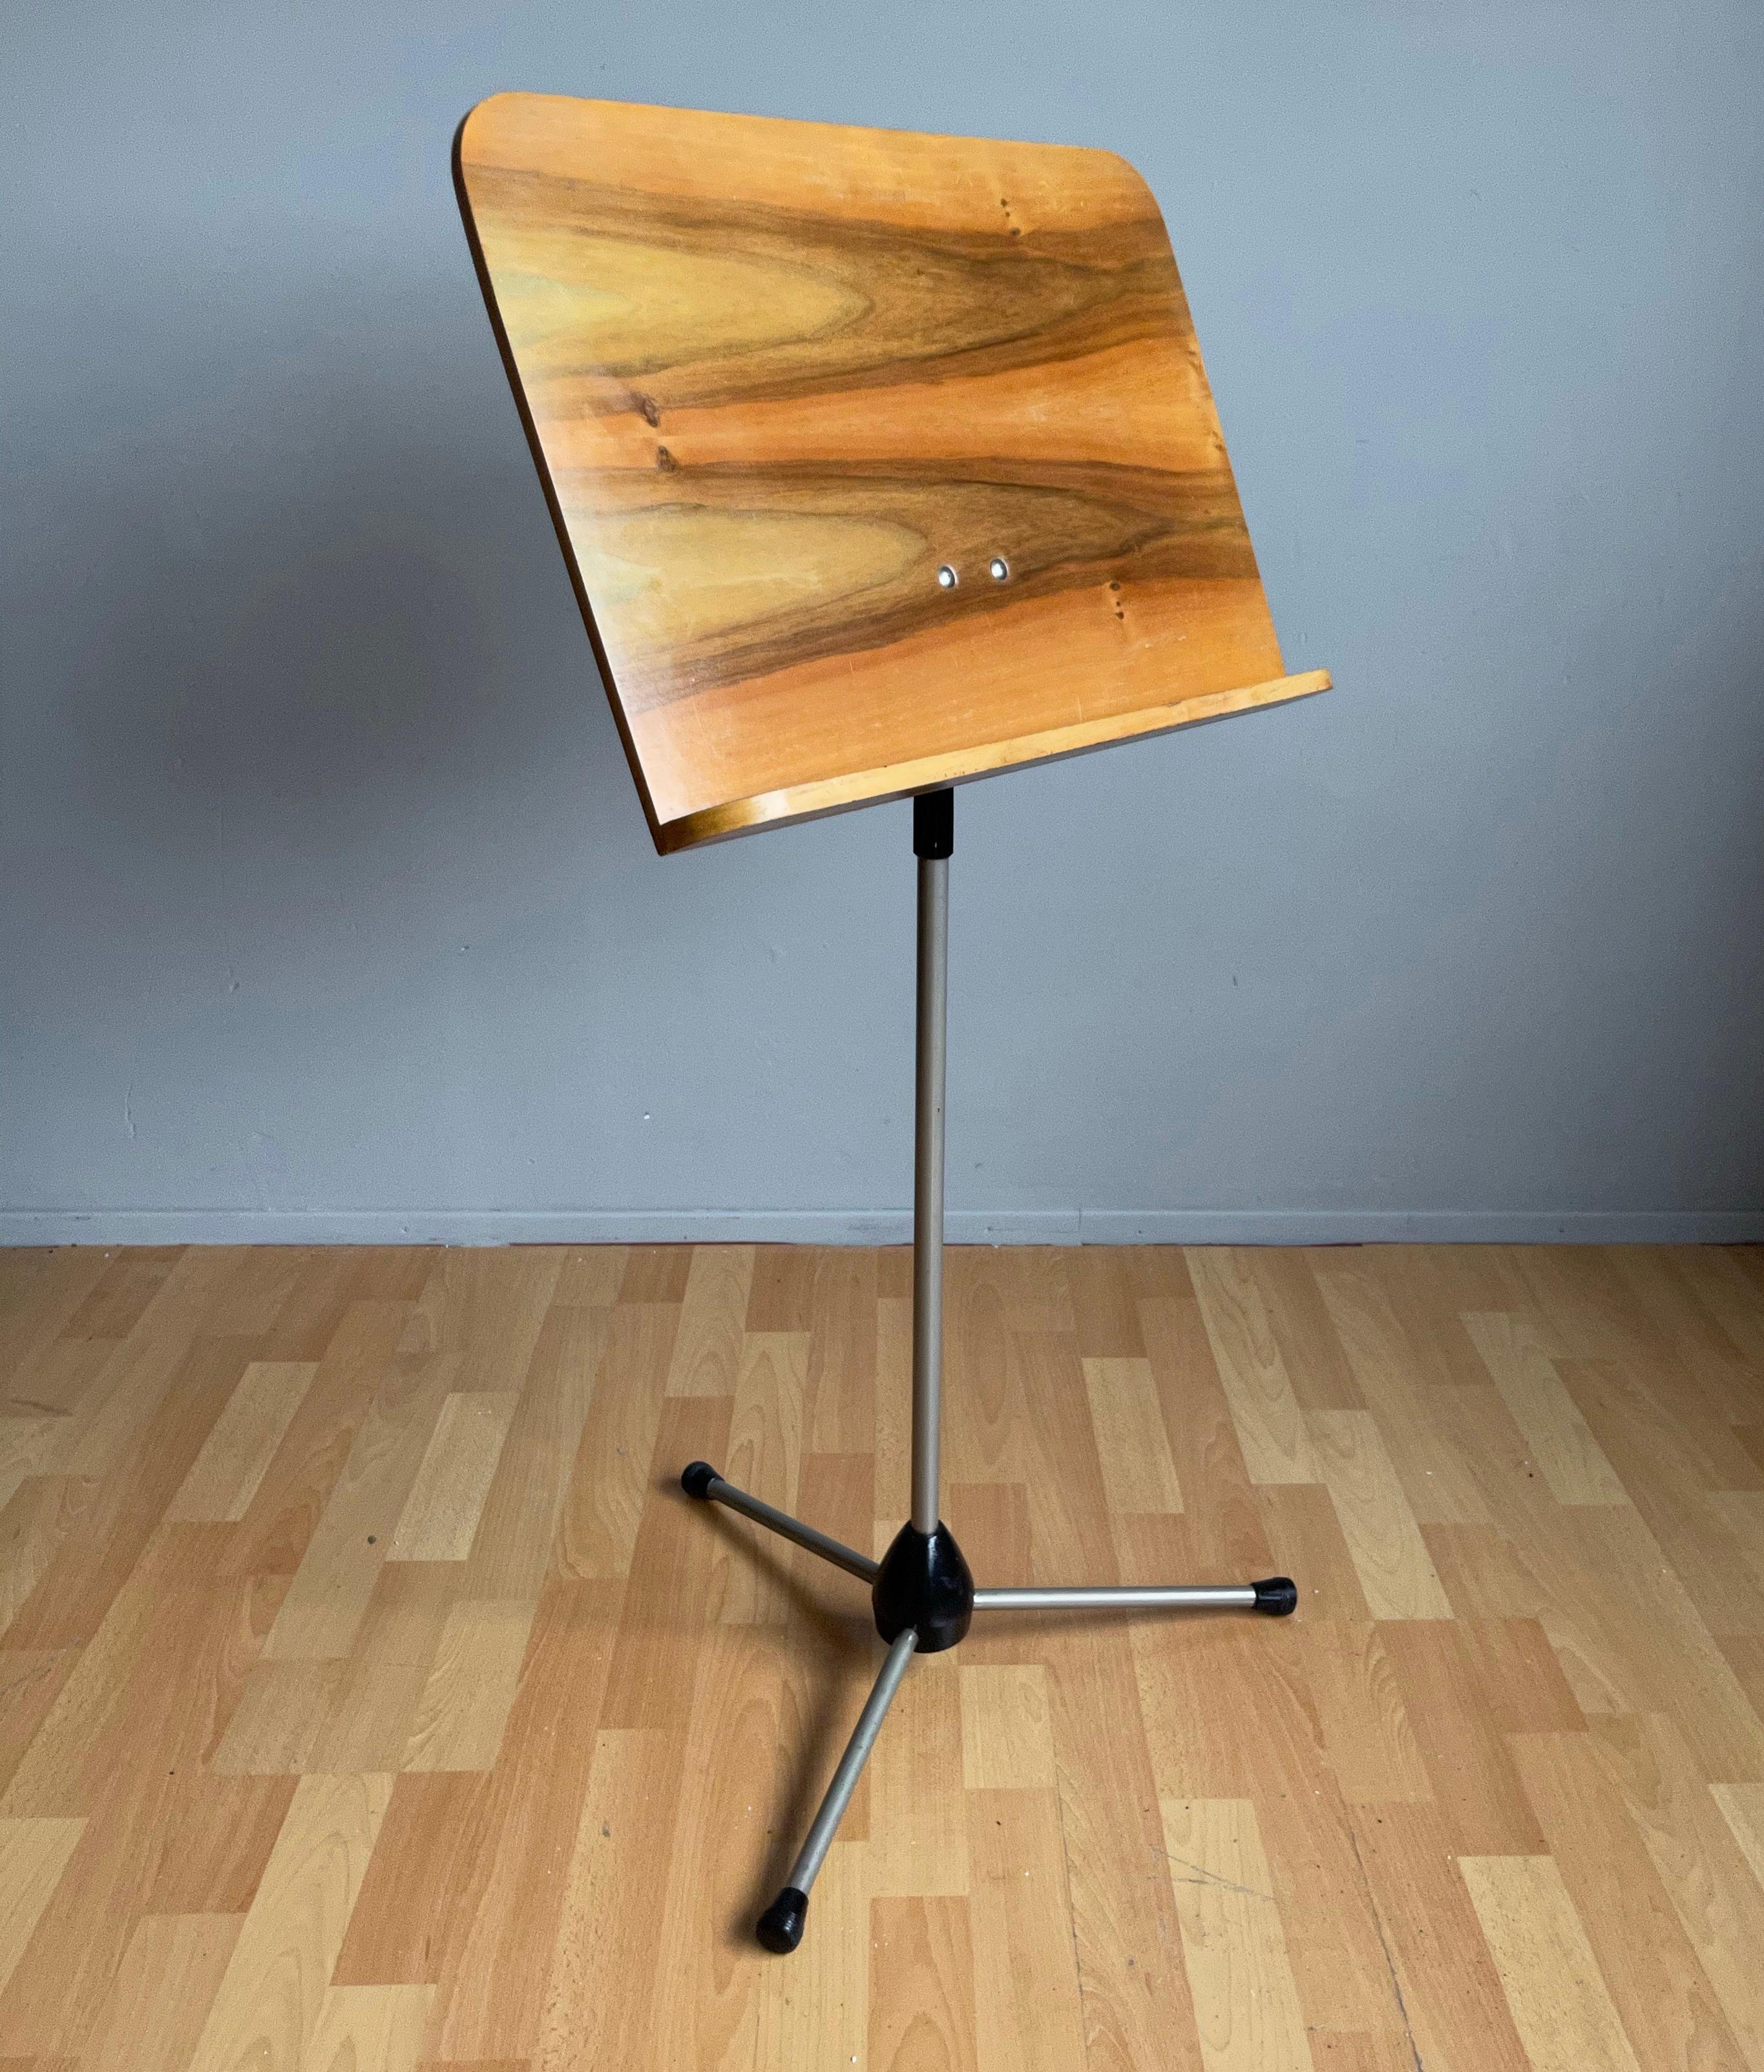 Stylish and practical, 1950s vintage lectern stand for music paper, books etc.

Lecterns from the midcentury era truly are a rare find. To have found one in this amazing condition and of this timeless beauty more than made our day. This finest